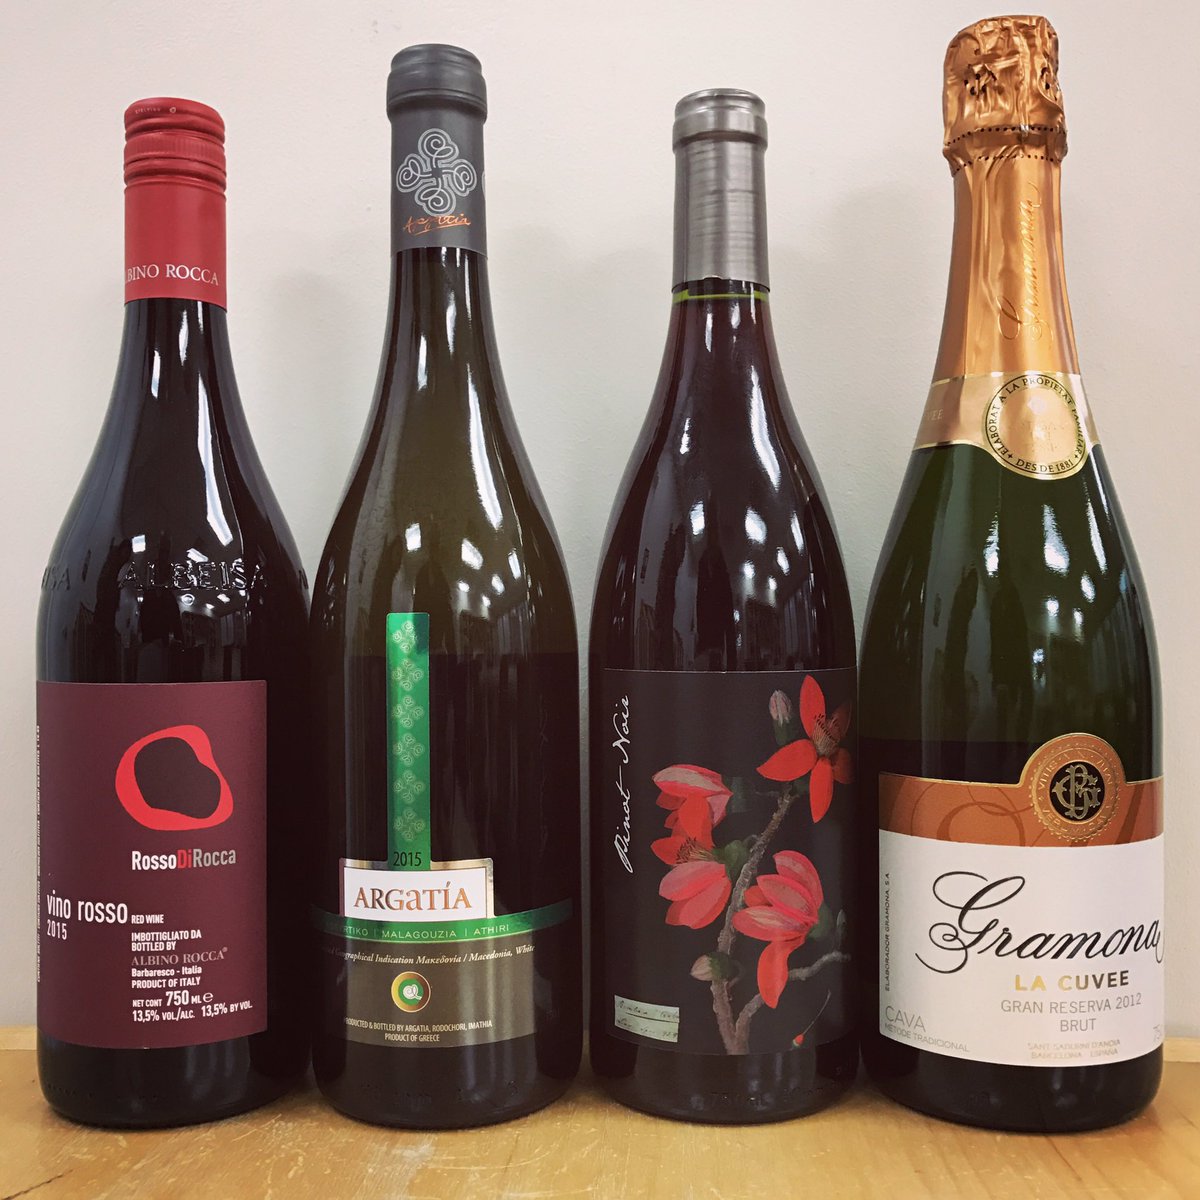 4 wines that can be given as gifts with no need for wrap. @ArgatiaWines #AlbinoRocca @ginnypovall @cavasgramona #DrinkVerity #WineWednesday